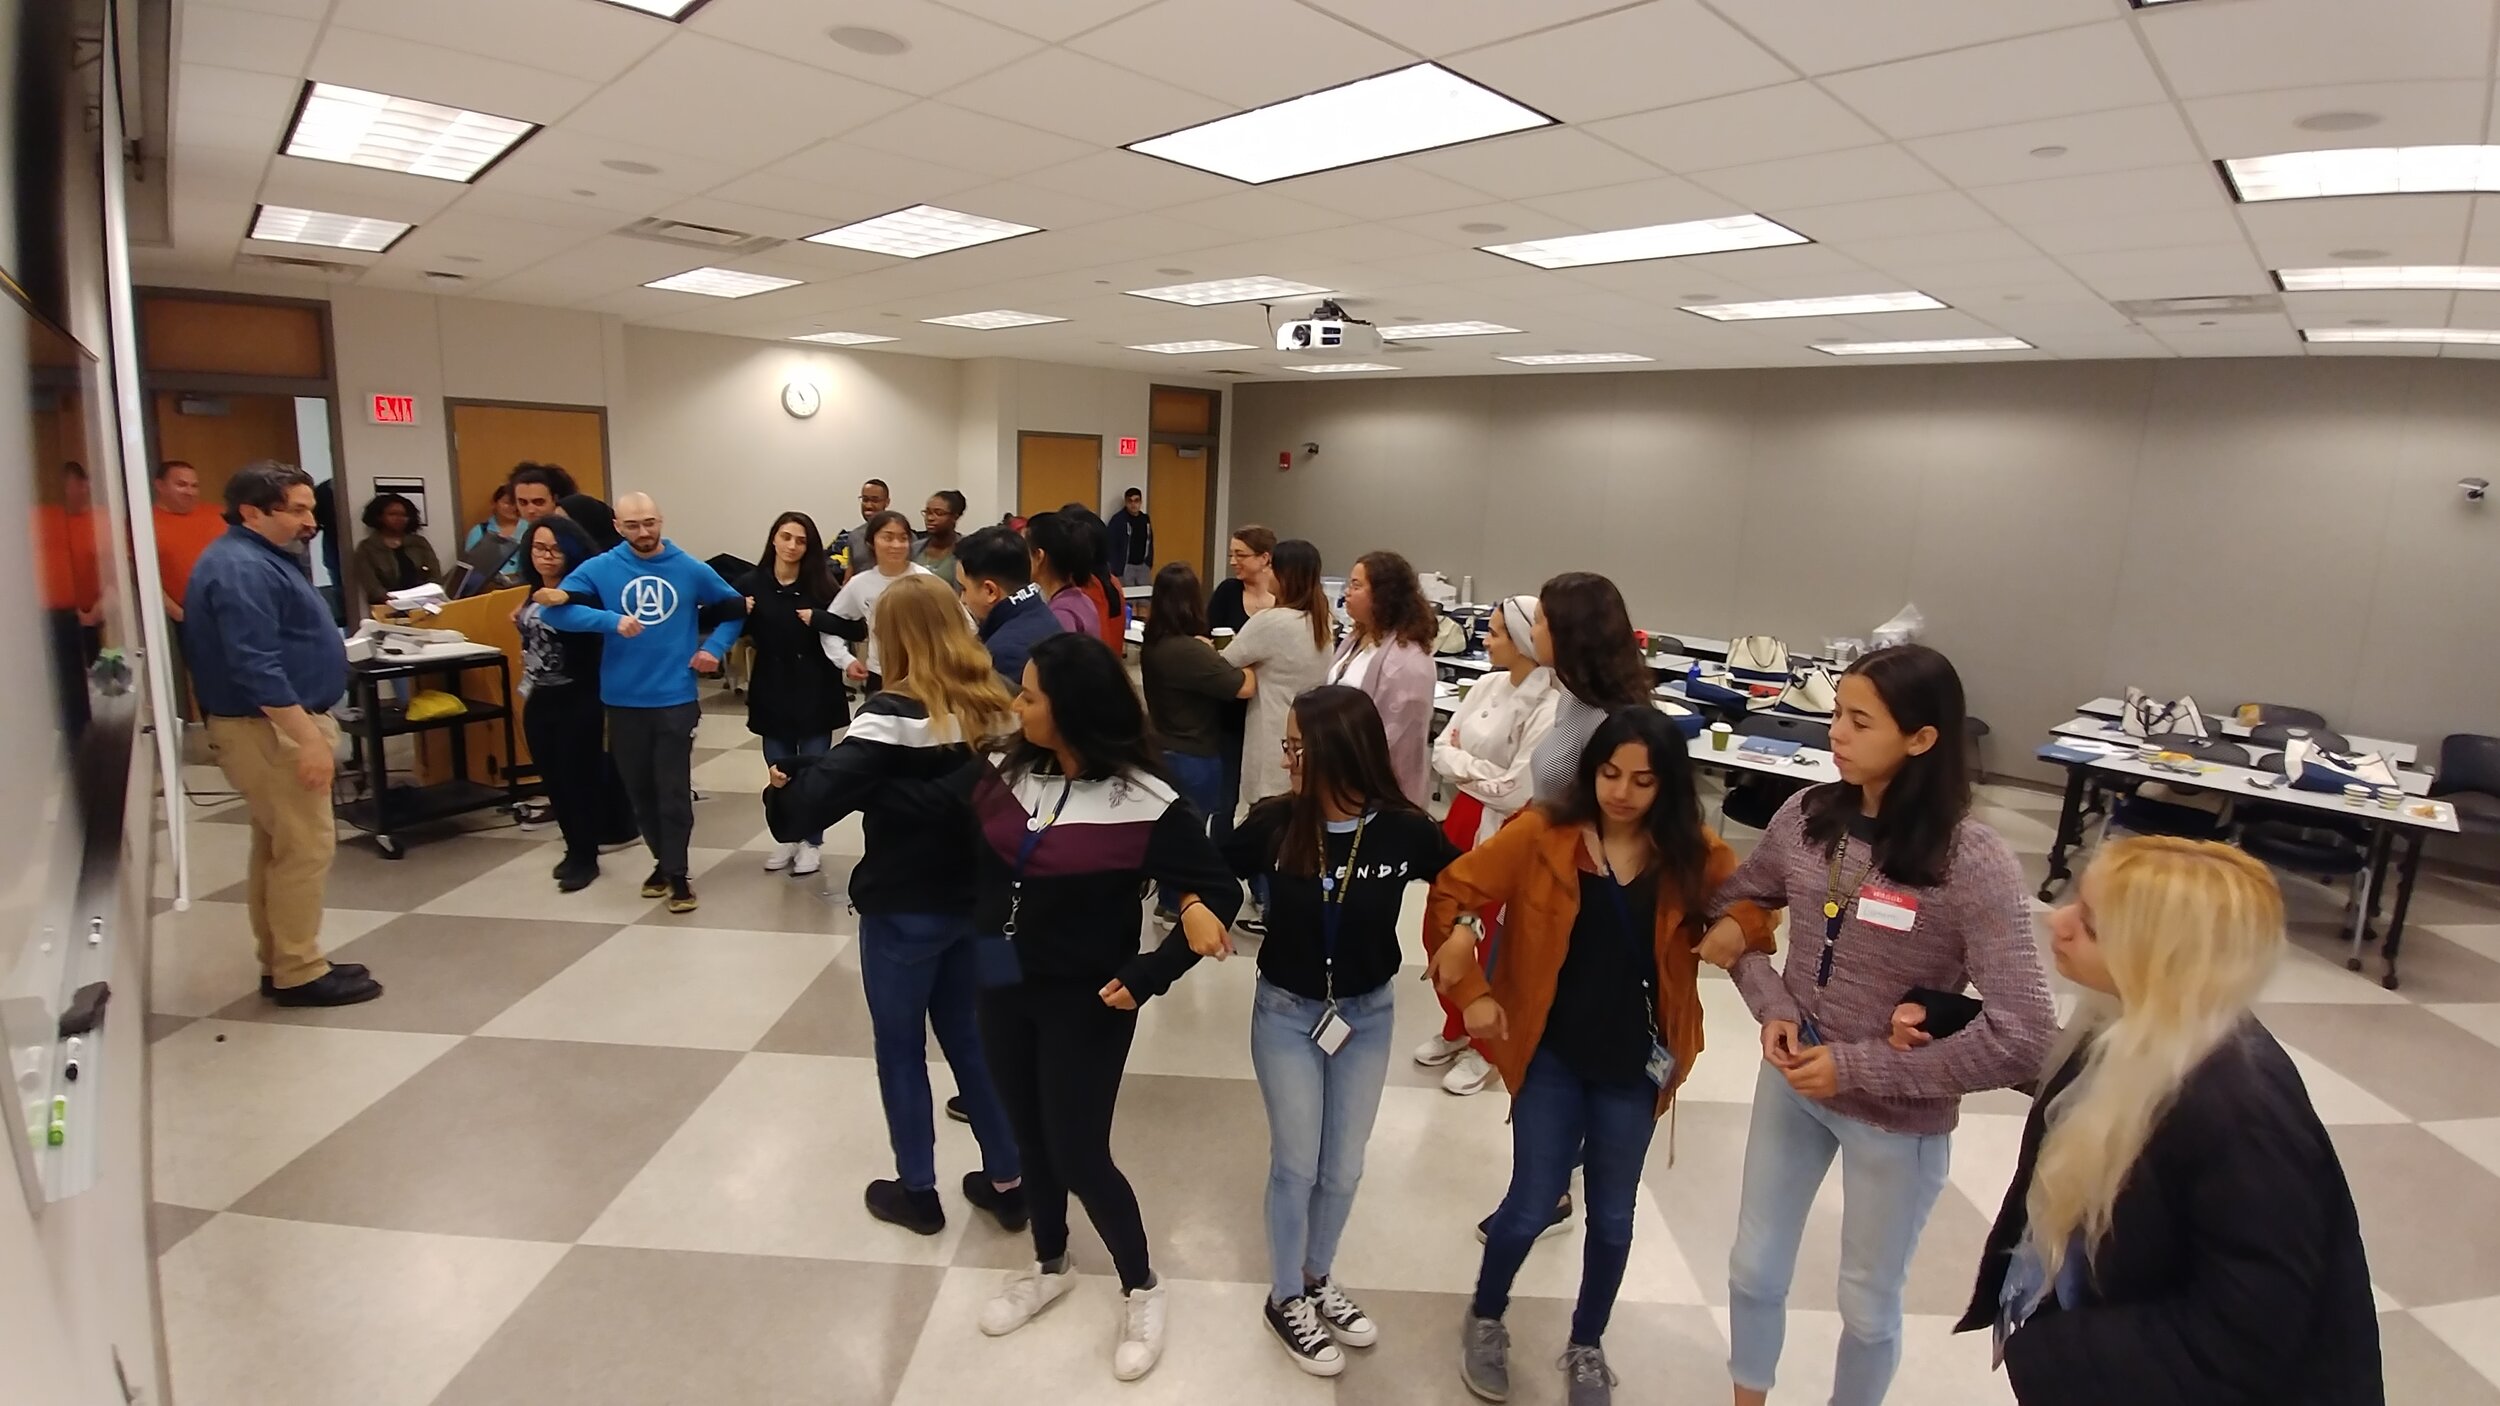  Students link arms for the Gastrulation Dance, led by Dr. Scott Barolo 